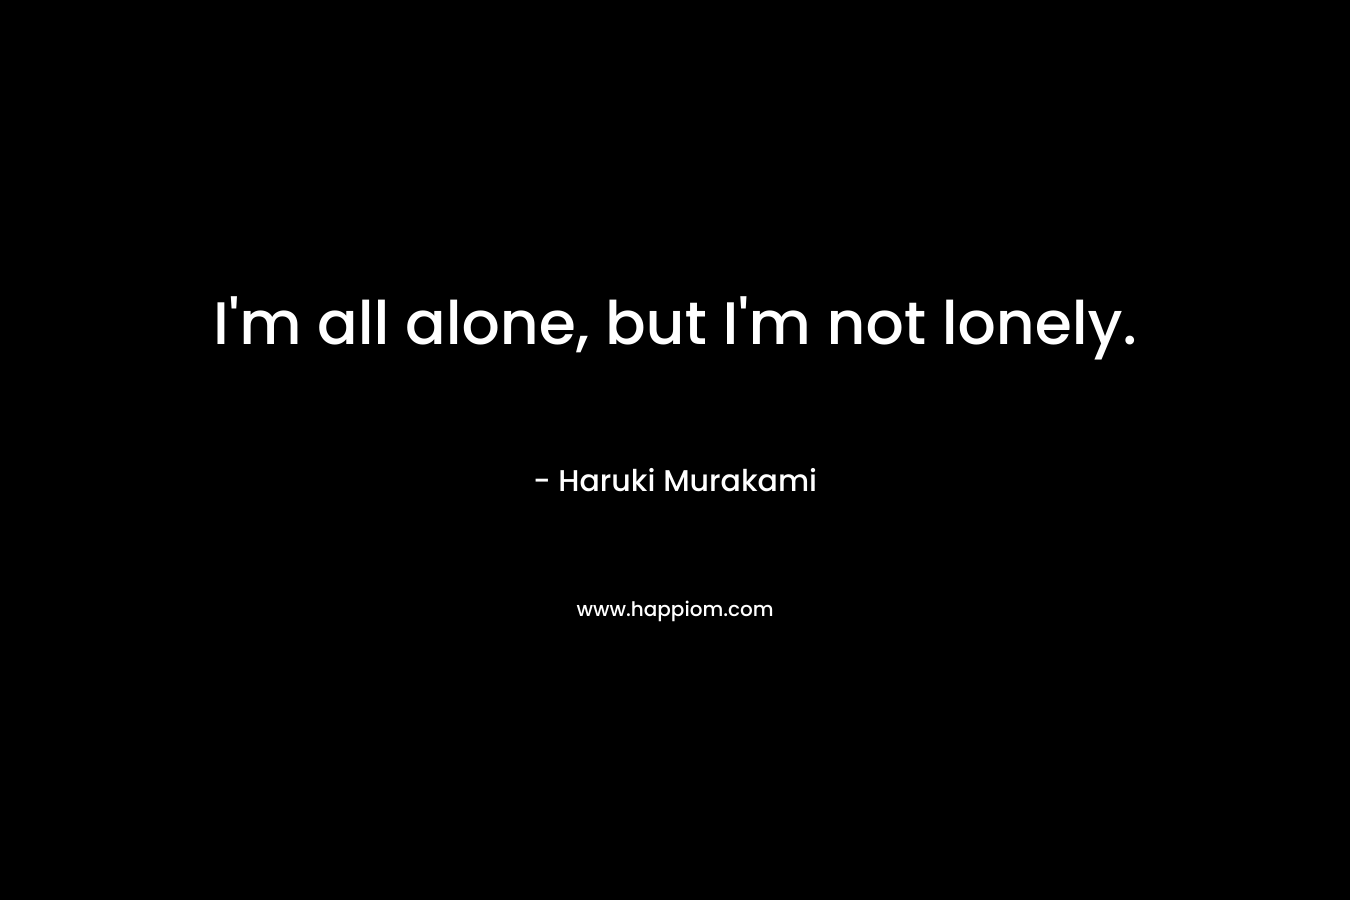 I'm all alone, but I'm not lonely.